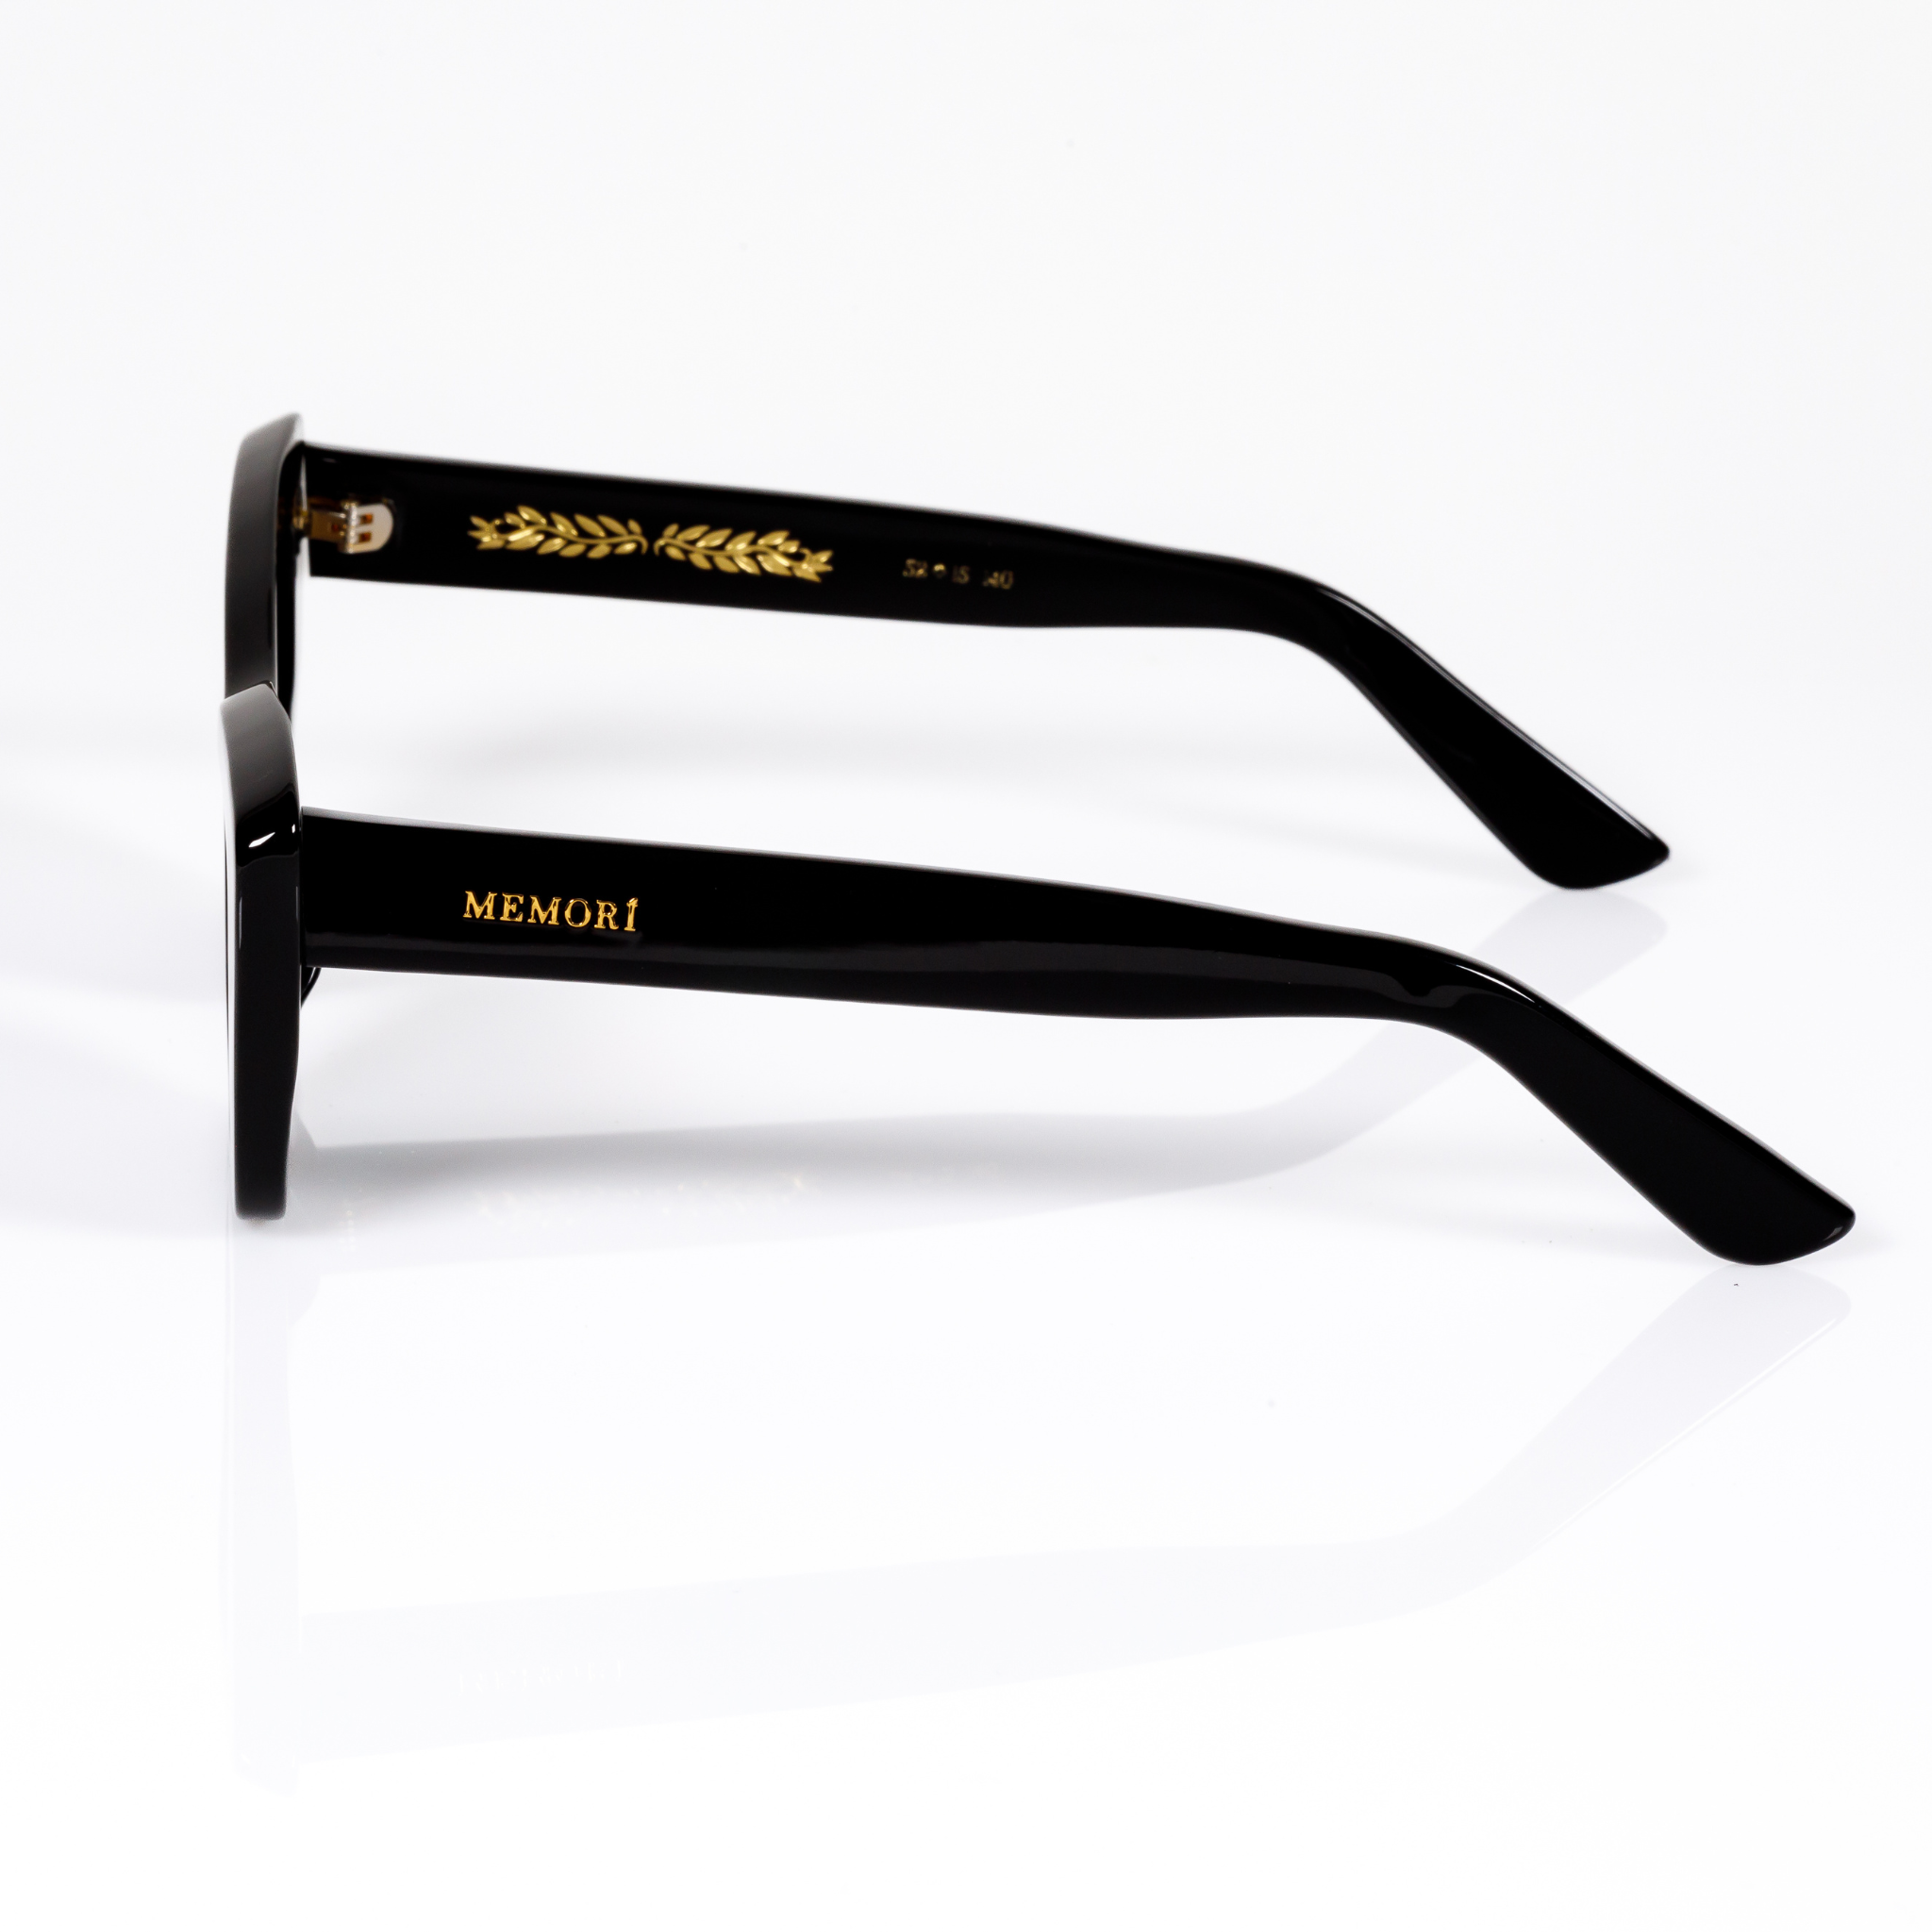 acetate cate eye sunglasses size small, profile view product image. features gold foil laurel leaf internal temple arm detail and external inlaid memorí logo